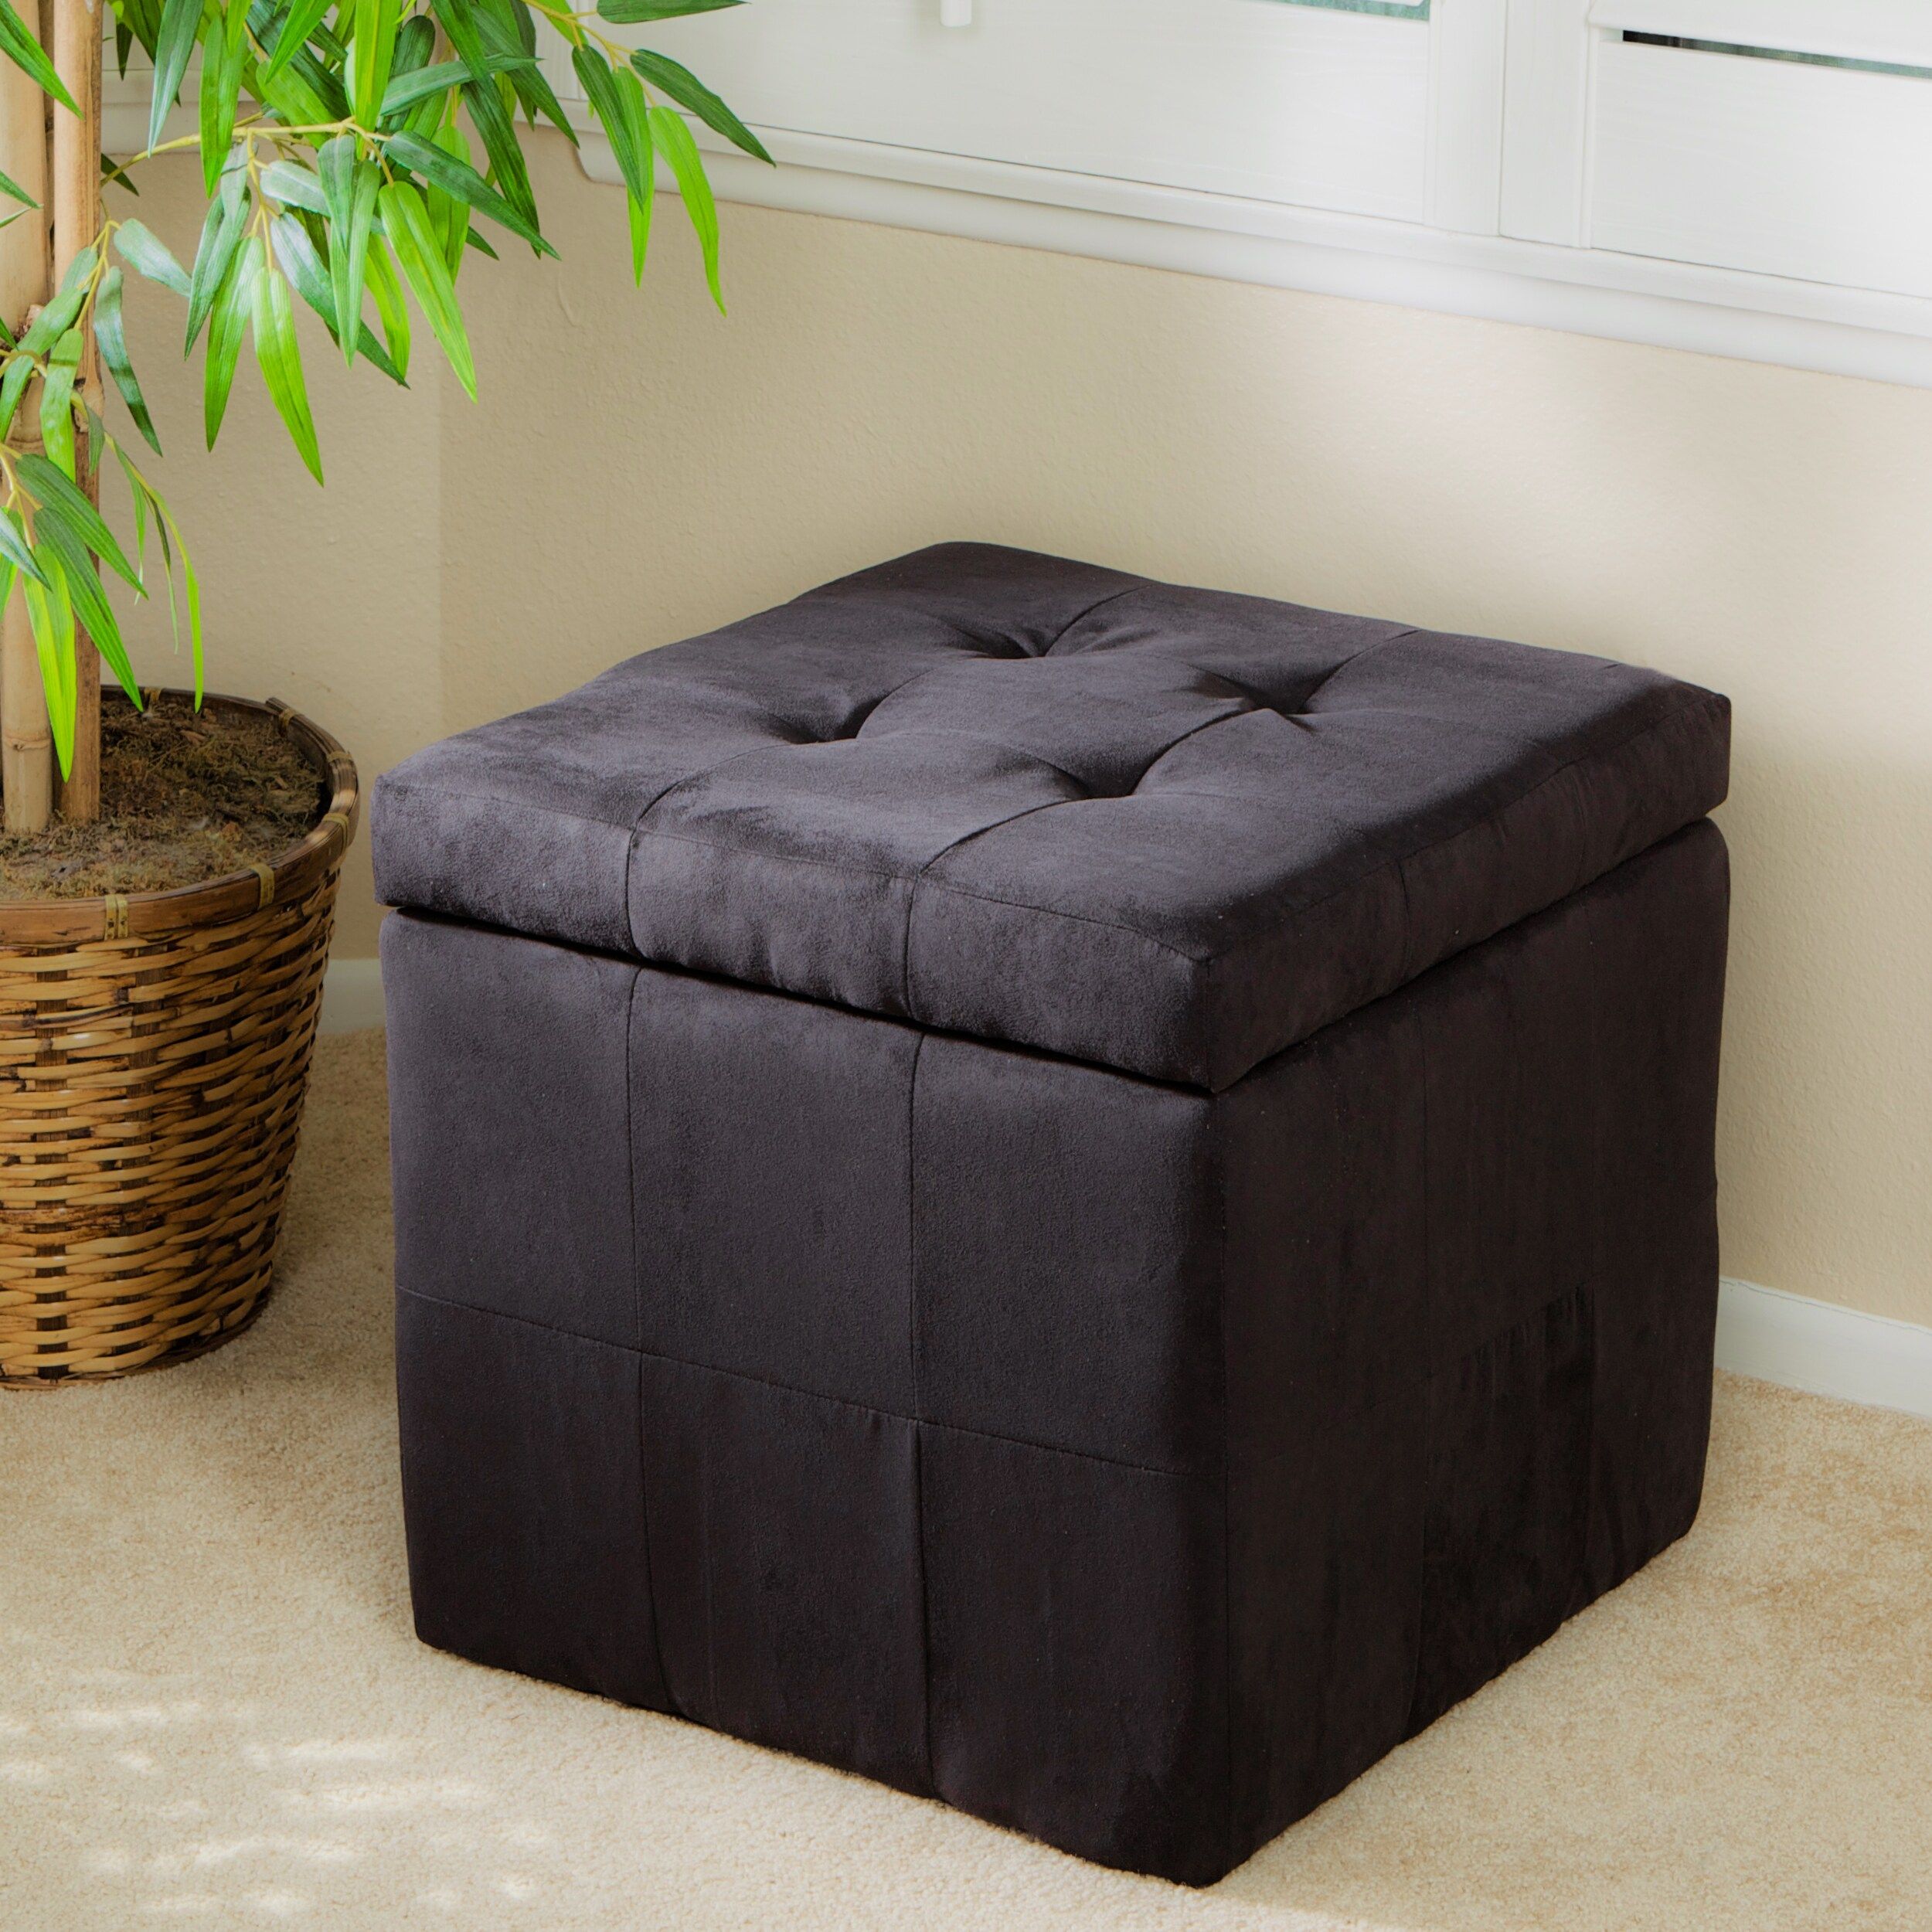 Tufted Black Fabric Storage Cube Ottoman – 13915122 – Overstock Inside Stripe Black And White Square Cube Ottomans (View 2 of 20)